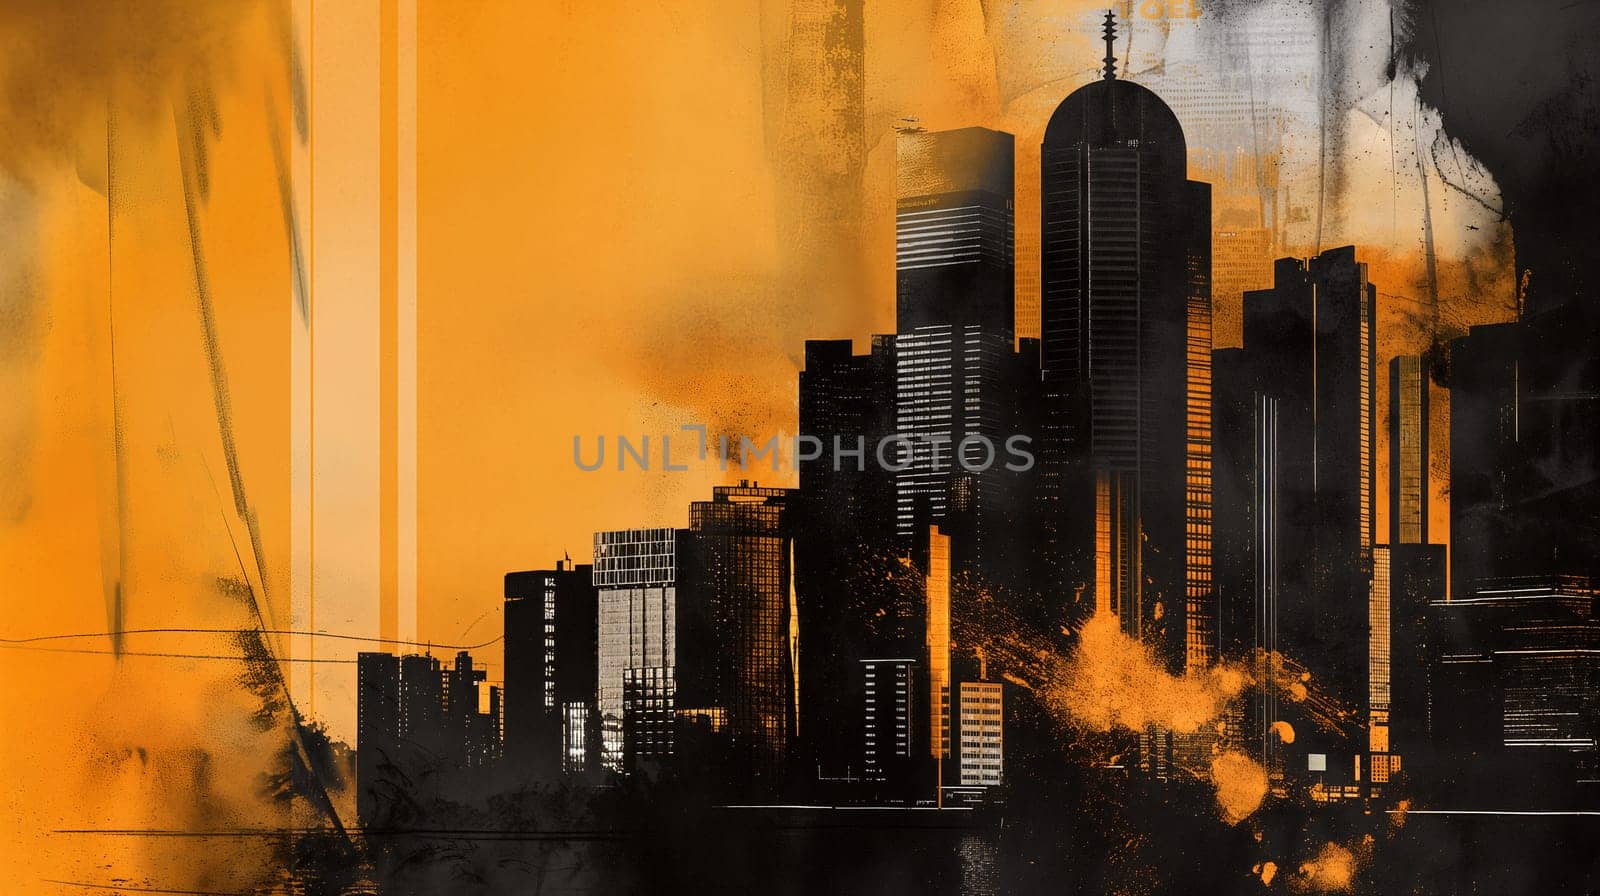 Abstract Urban Skyline at Sunset With Orange and Black Tones by chrisroll